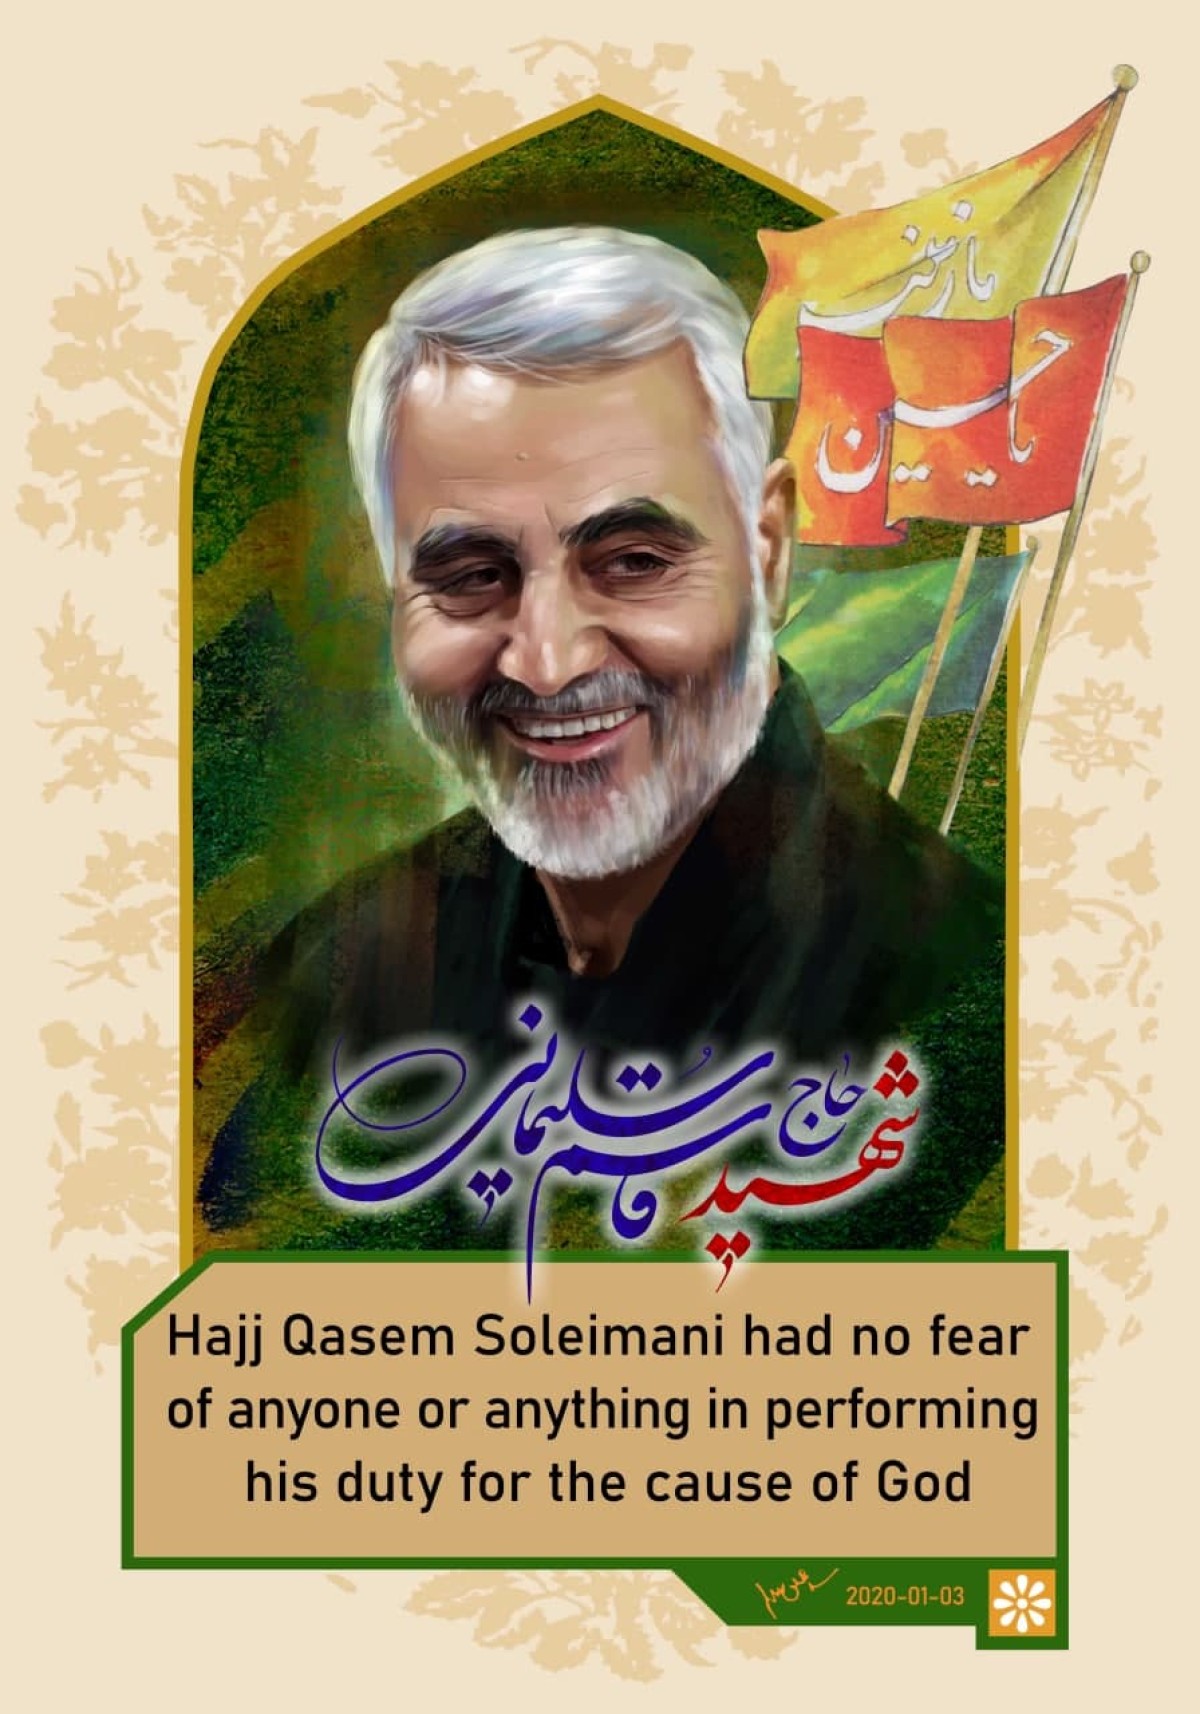  Hajj Qasem Soleimani had no fear of anyone or anything in performing his duty for the cause of God